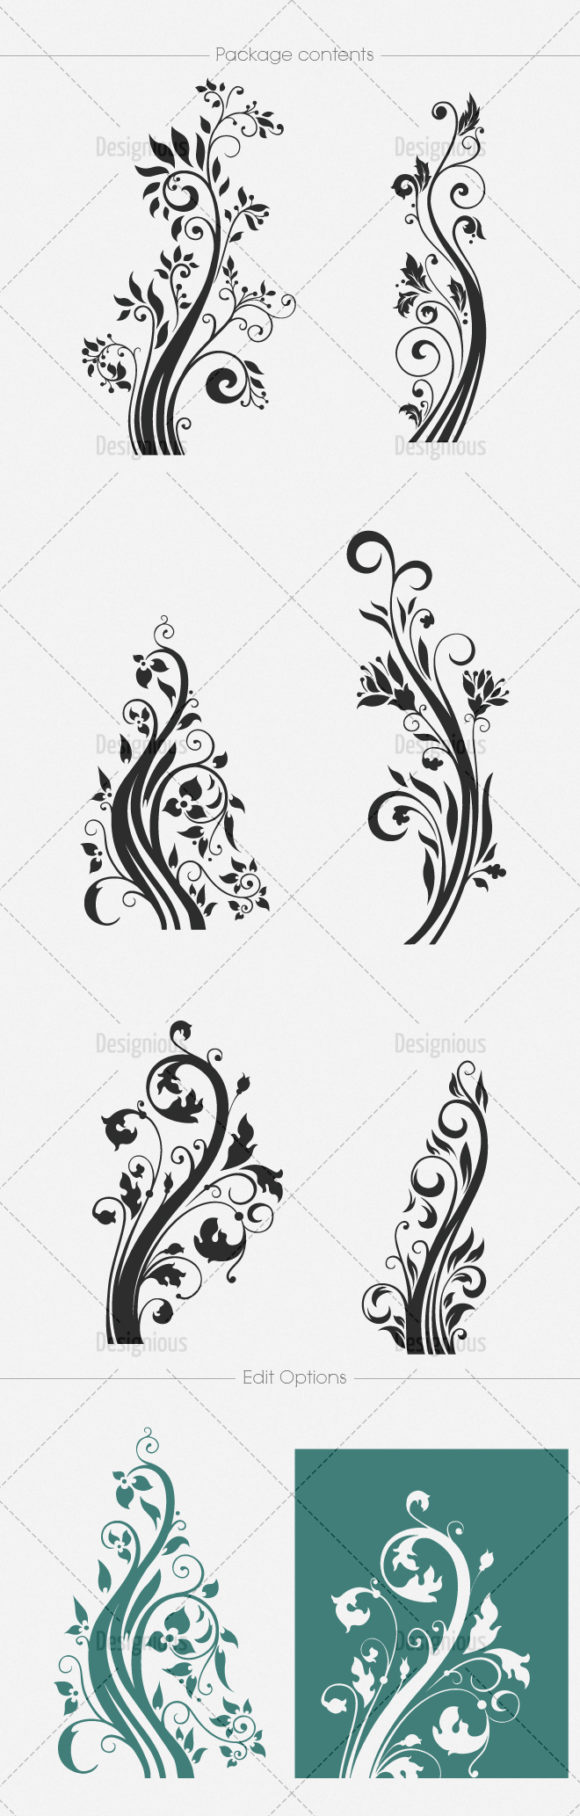 Floral Vector Pack 111 2